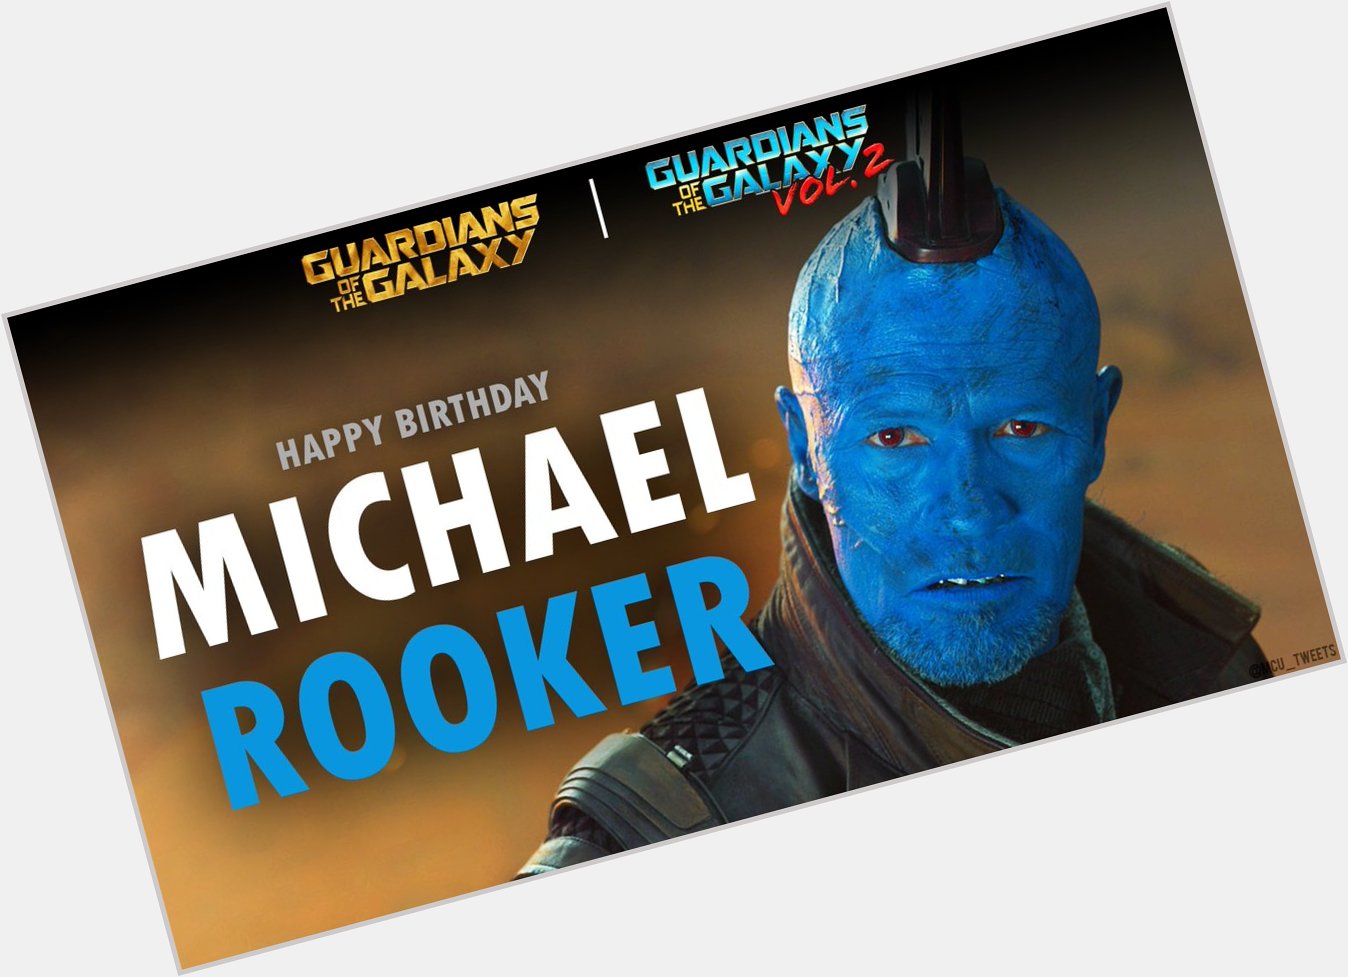 Wishing a very happy 63rd birthday to the MCU\s Yondu, actor Michael Rooker! 